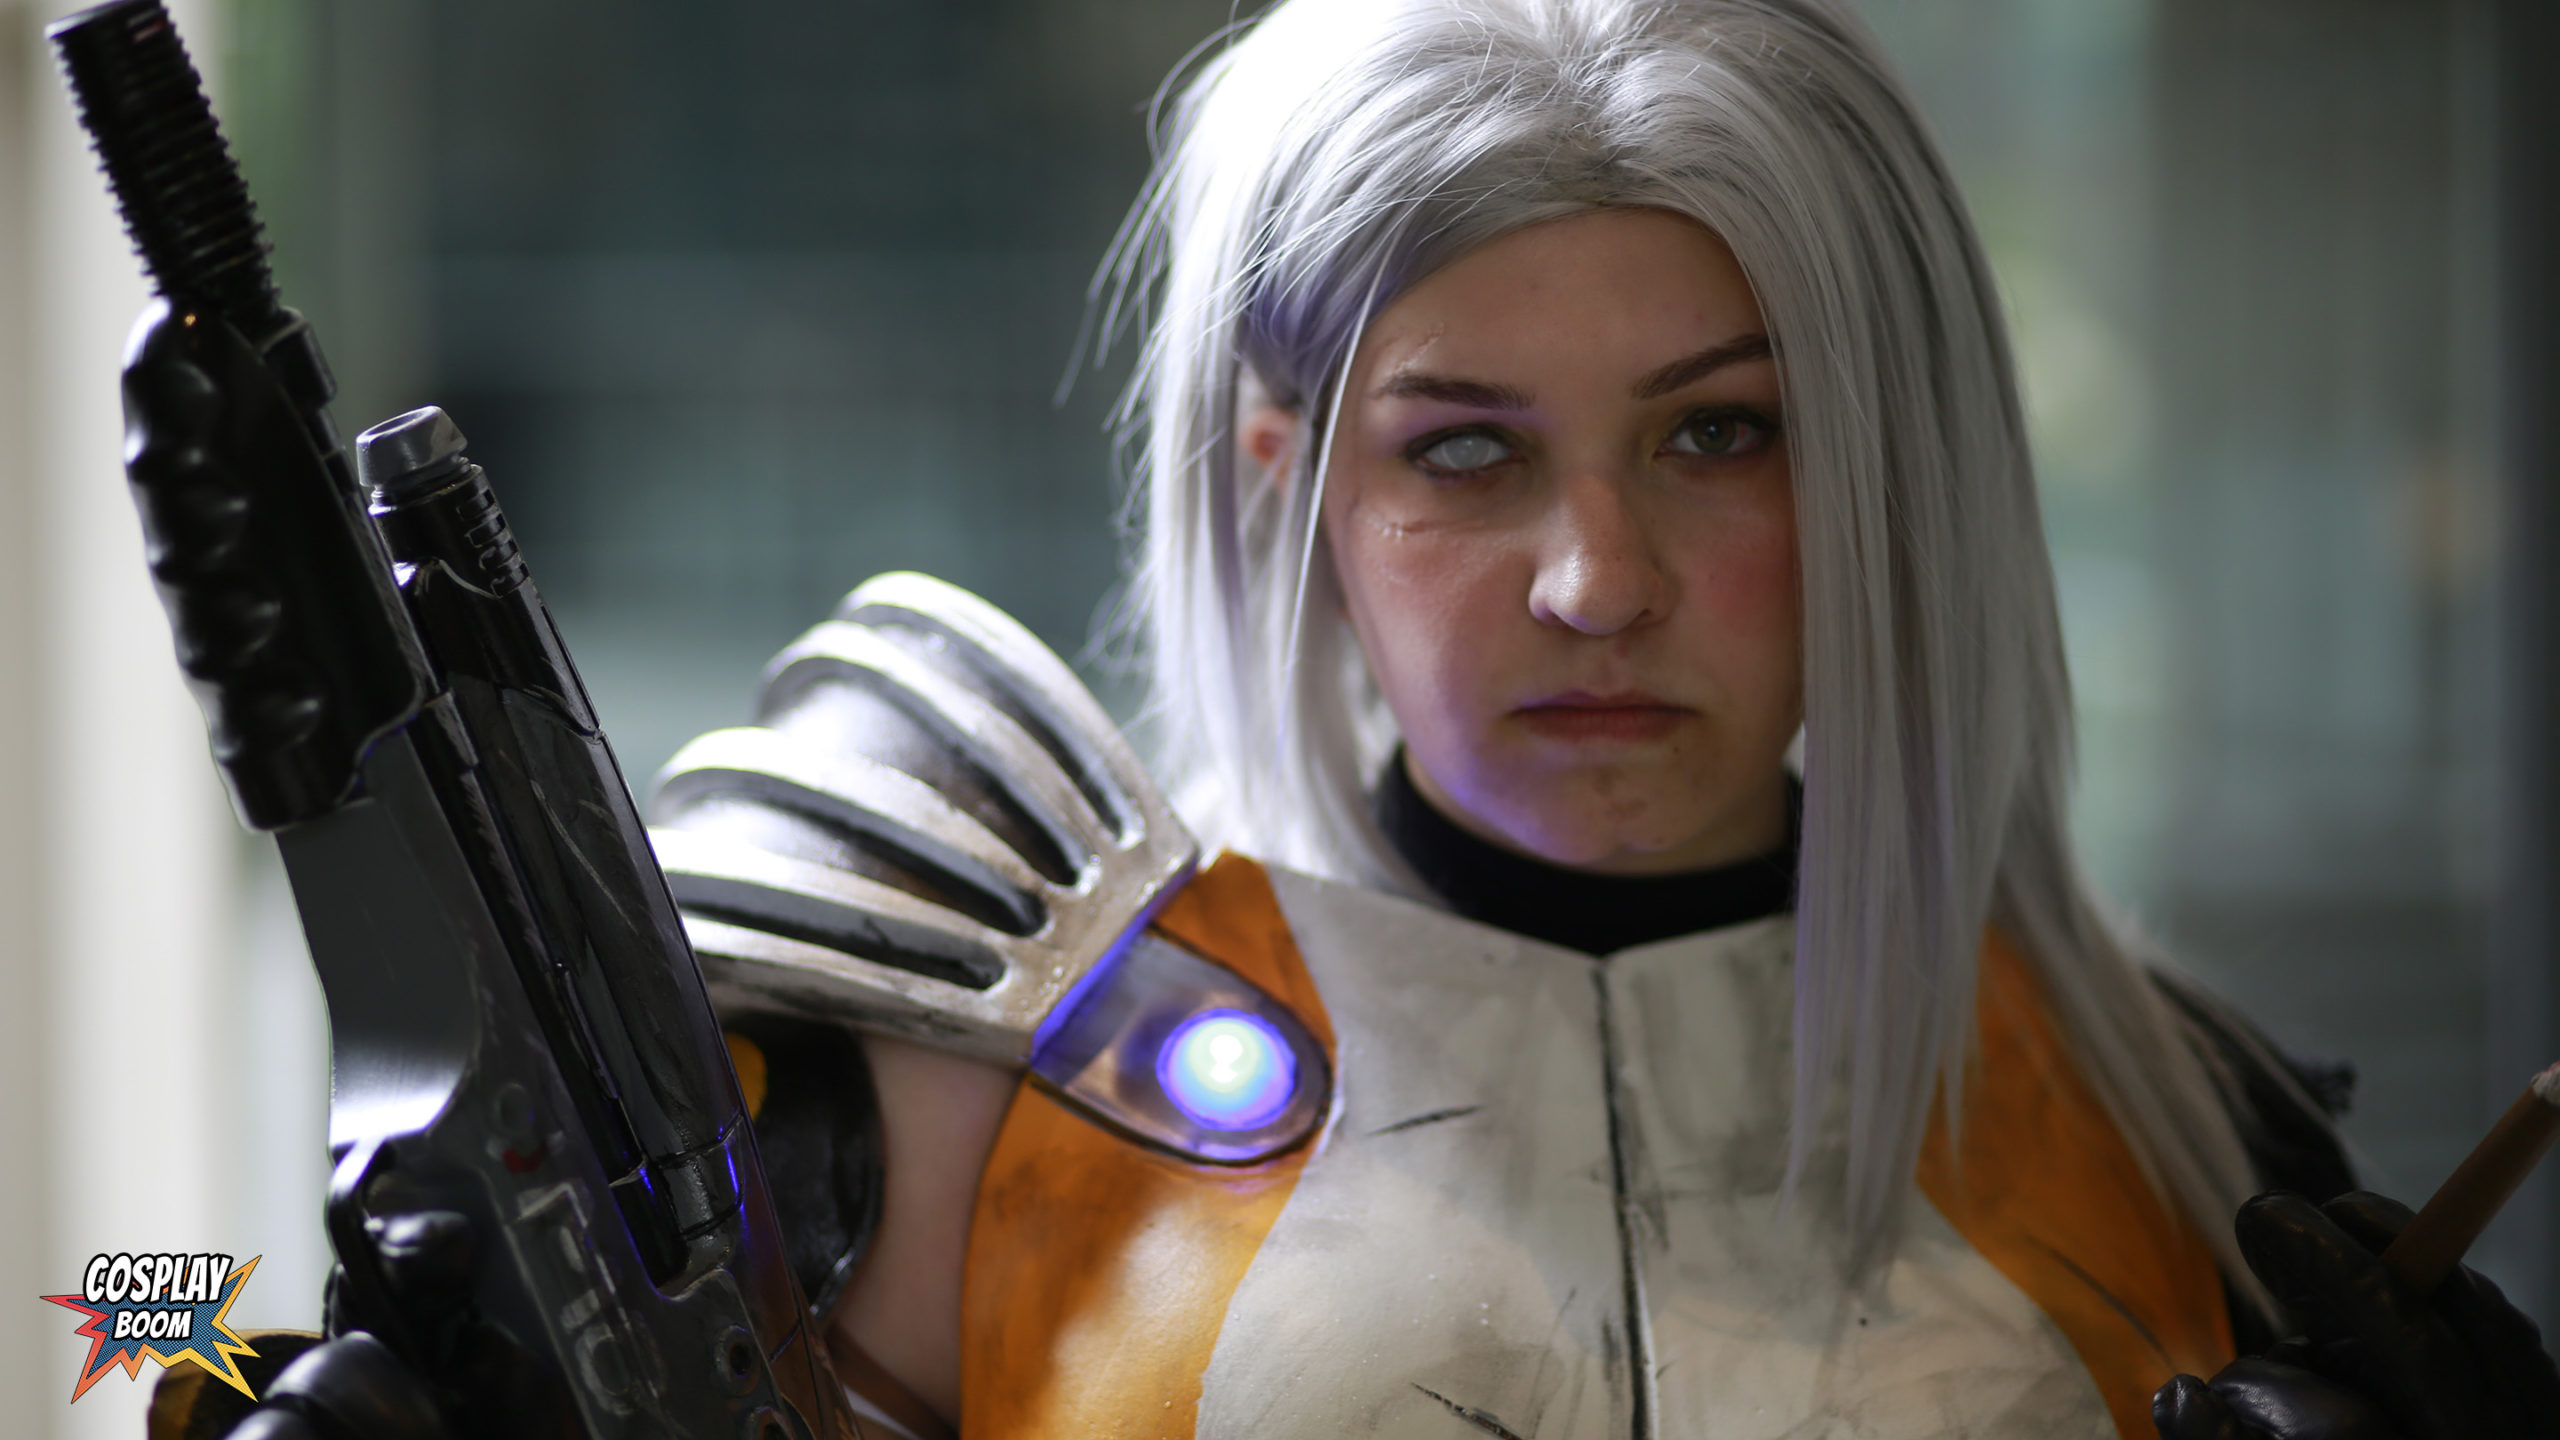 The Coolest Cosplay At PAX Prime, Day 2